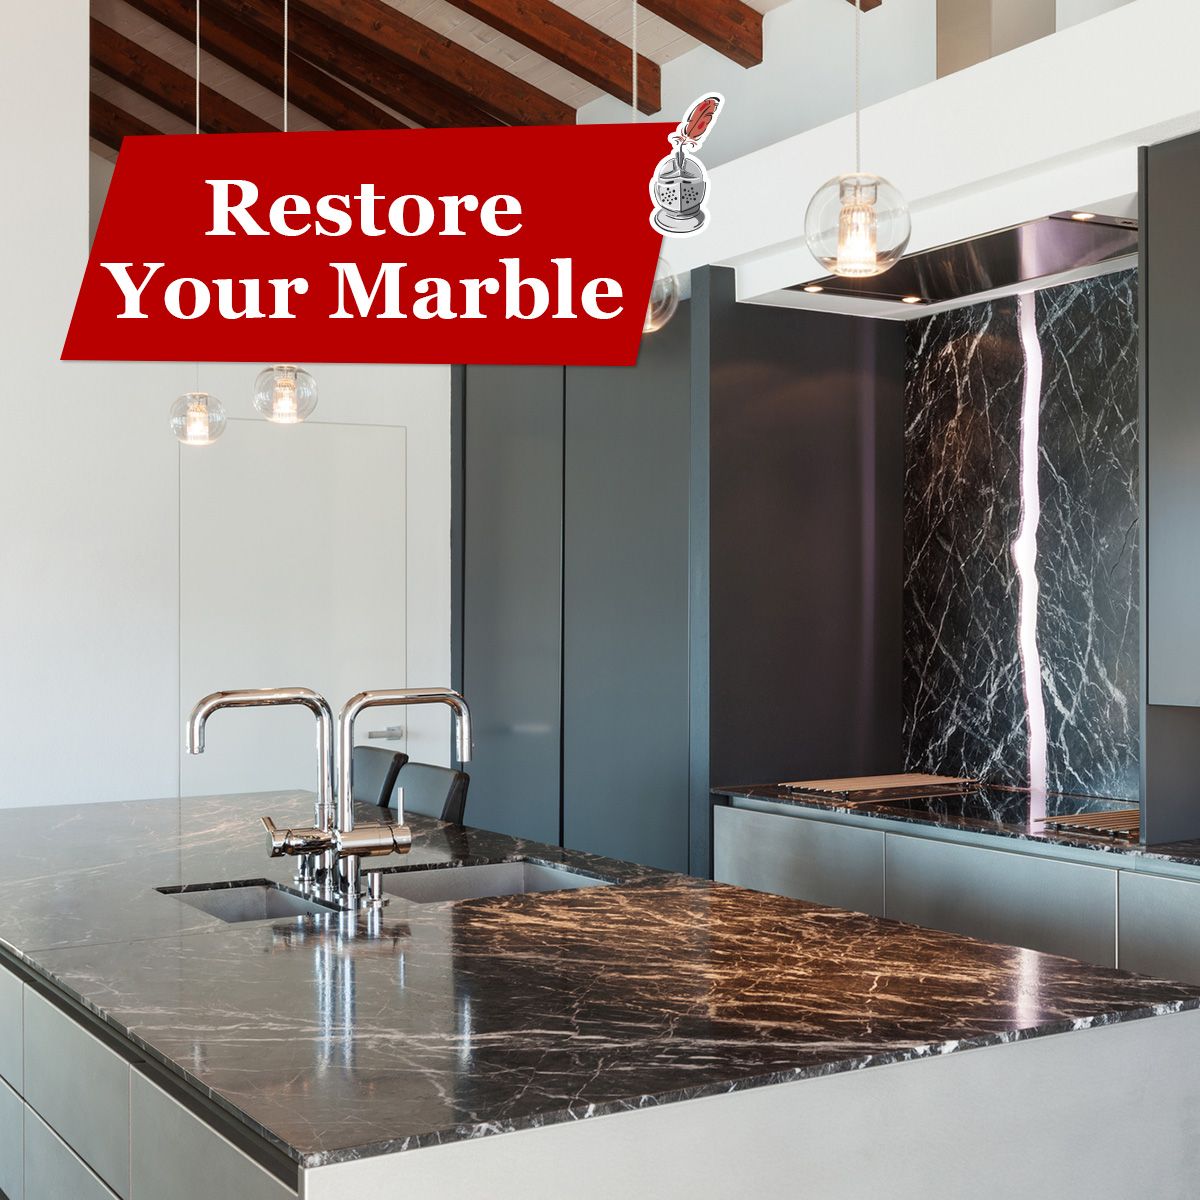 Restore Your Marble